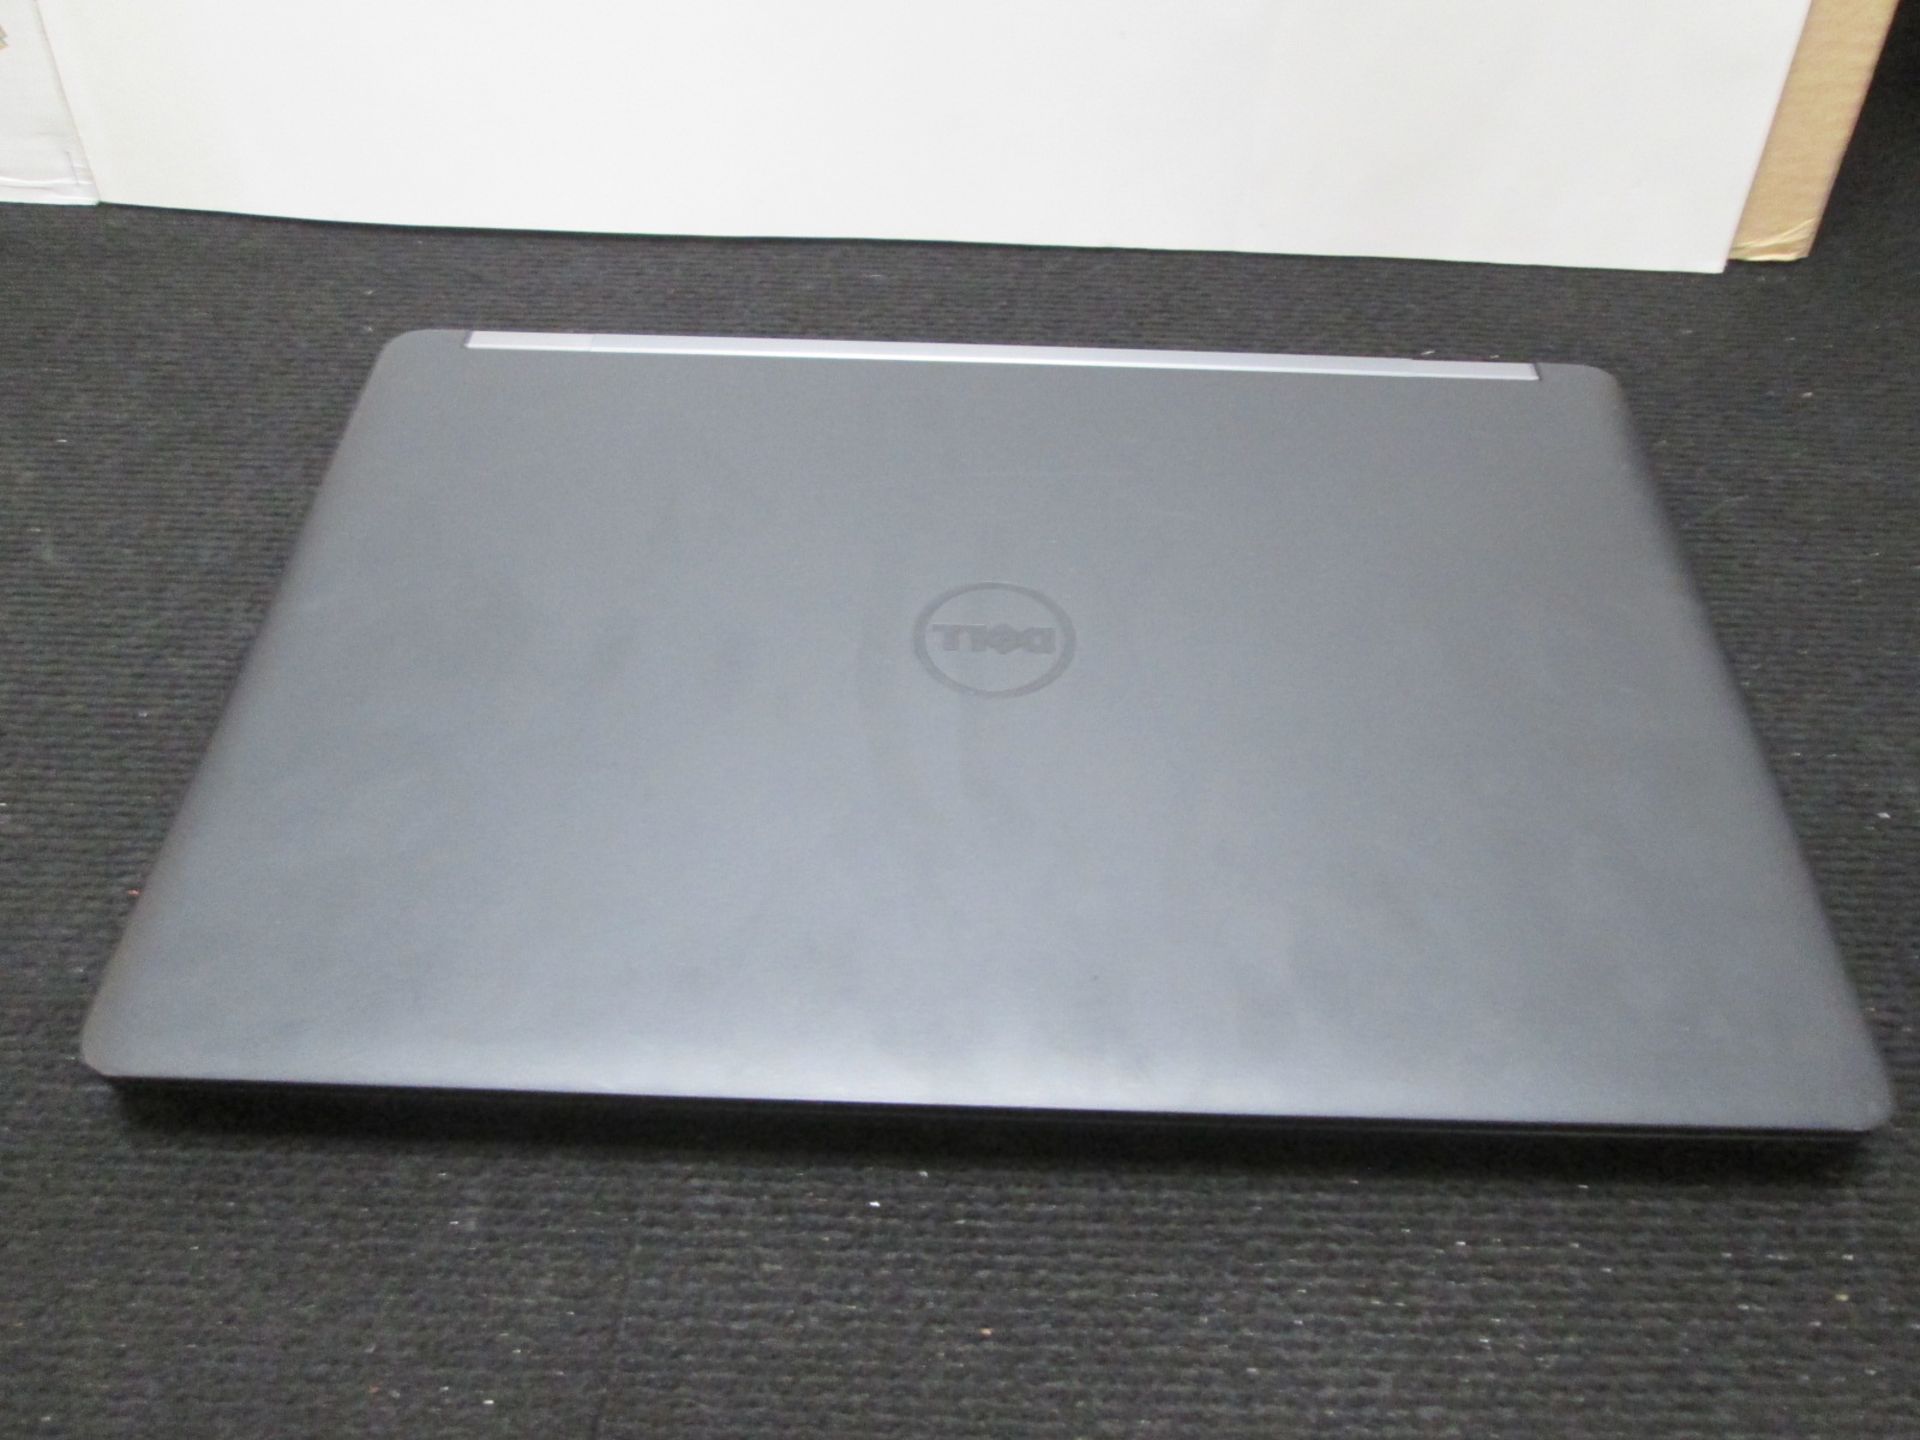 Dell Precision 3510 I7 Touchscreen Latop. In flight case. No operating software installed